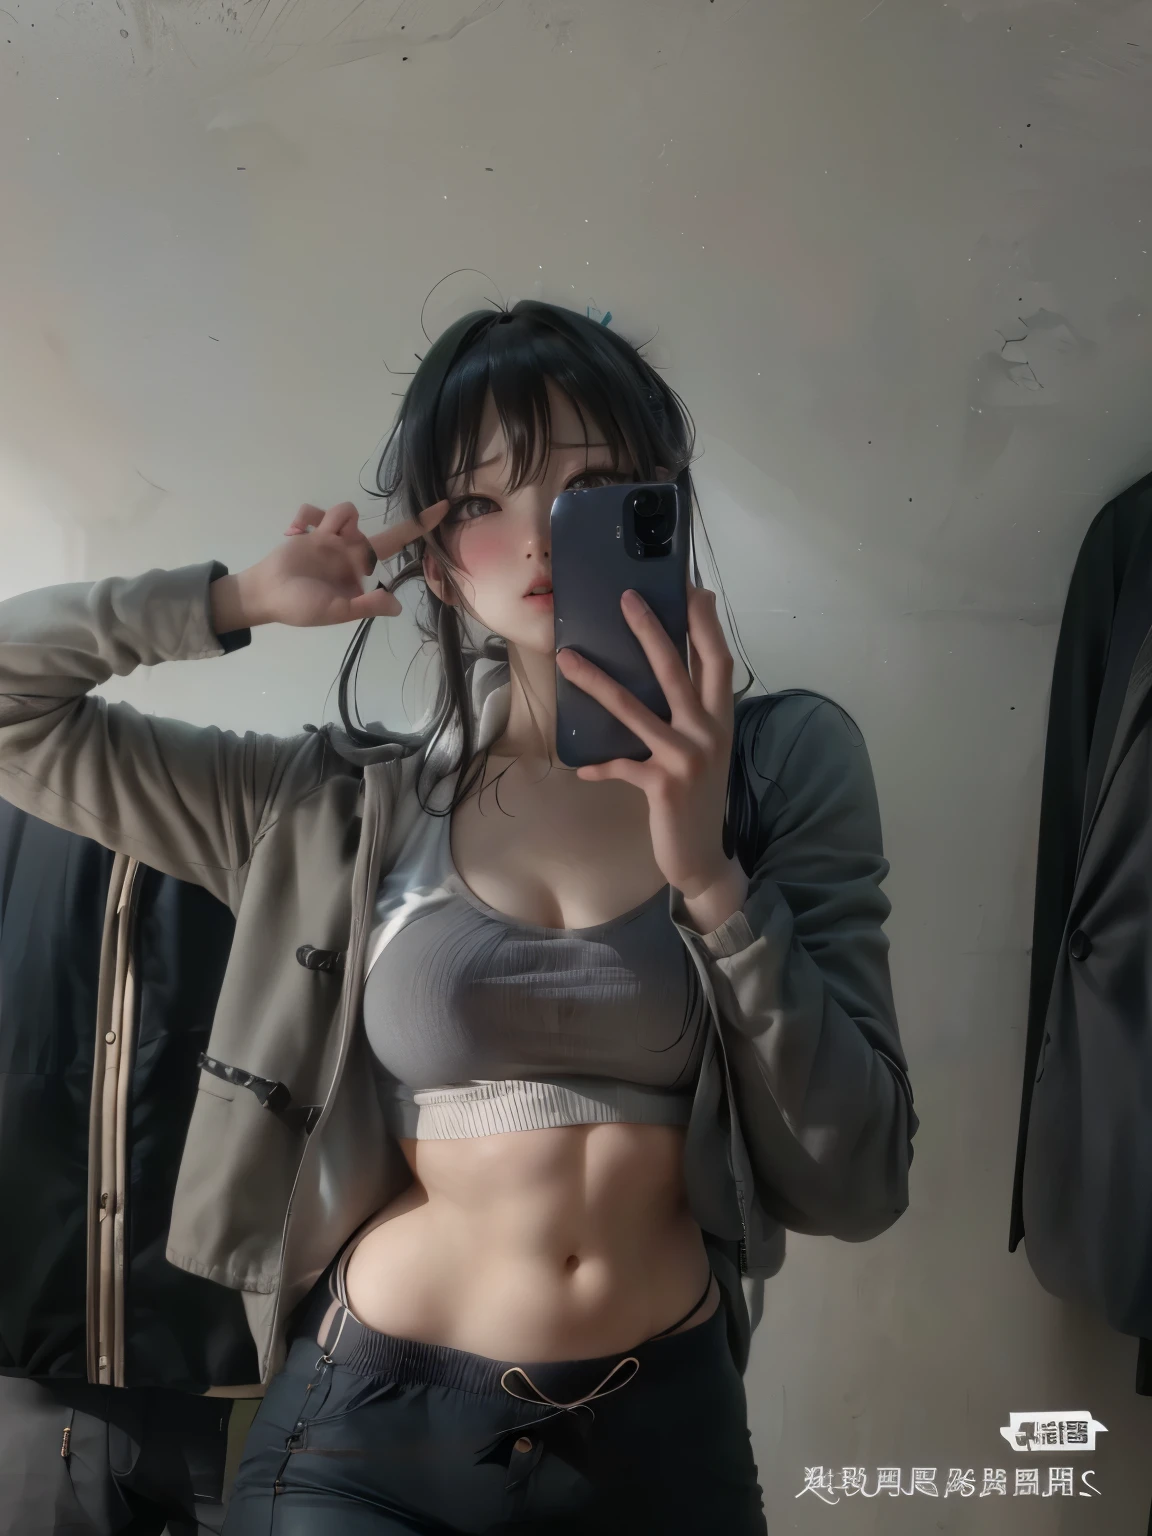 Female waist area，Weak waist，perfect body，Big breasts and thin waist，(Crop top, ）、white skin，reflective skin，of the waist，Perfect waist curve，S-shaped waist curve，Slim waist（（（（（Thin of the waist））））），Vest line，Charming of the waist，waist，waist，There are no traces of training，Low-waisted pants exposing navel，Small man's waist，，waist，Vest line，sfwSmall man's waist，an hourglass waist，S-shaped waist，The thigh junction  exposed，Elongated navel